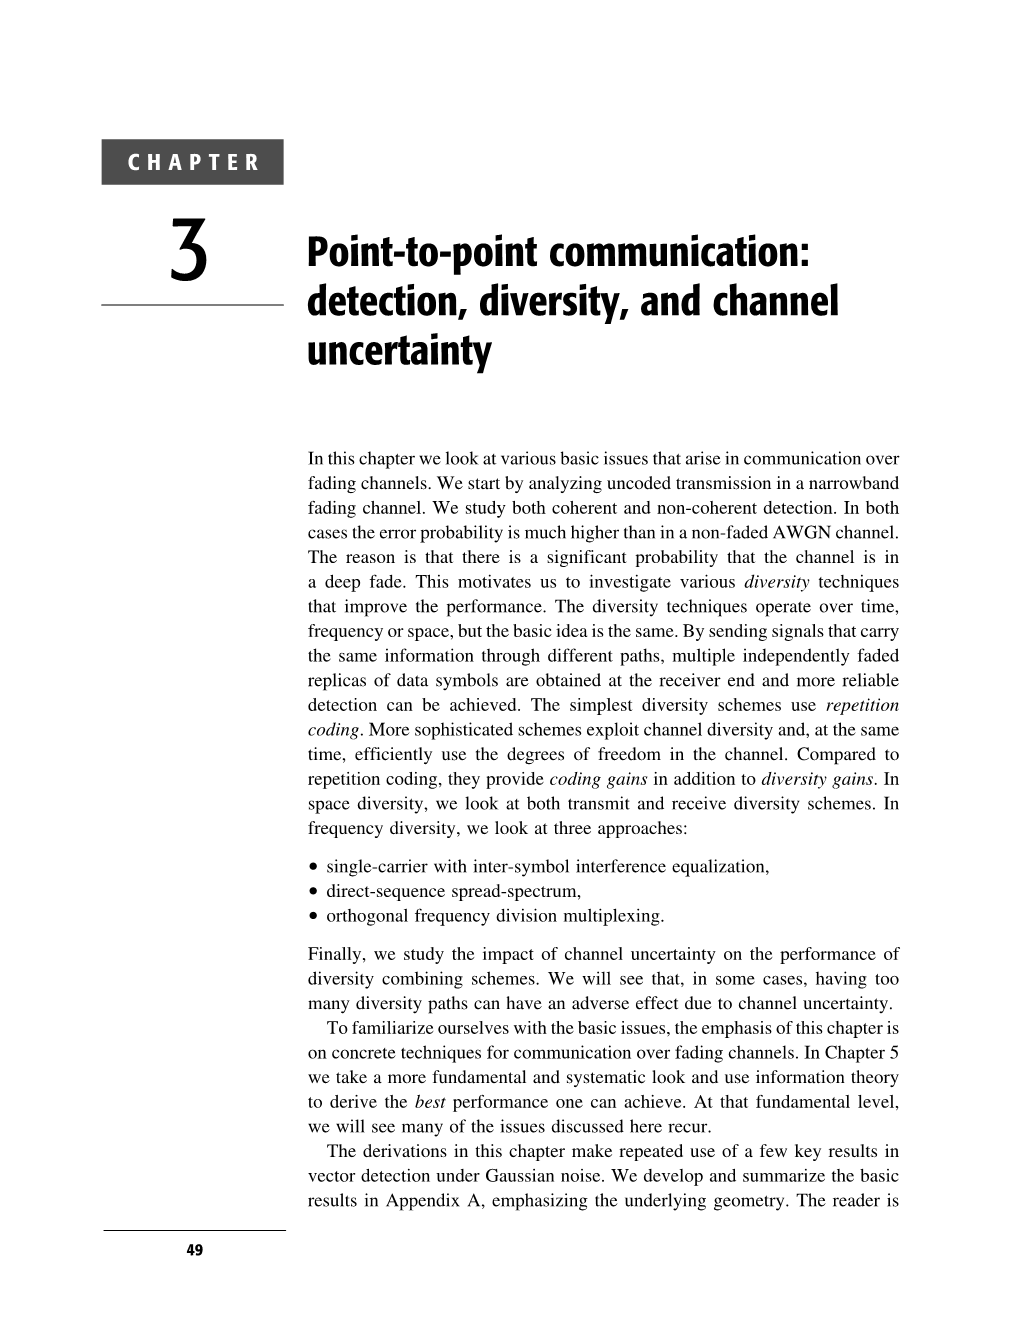 3 Point-To-Point Communication: Detection, Diversity, and Channel Uncertainty